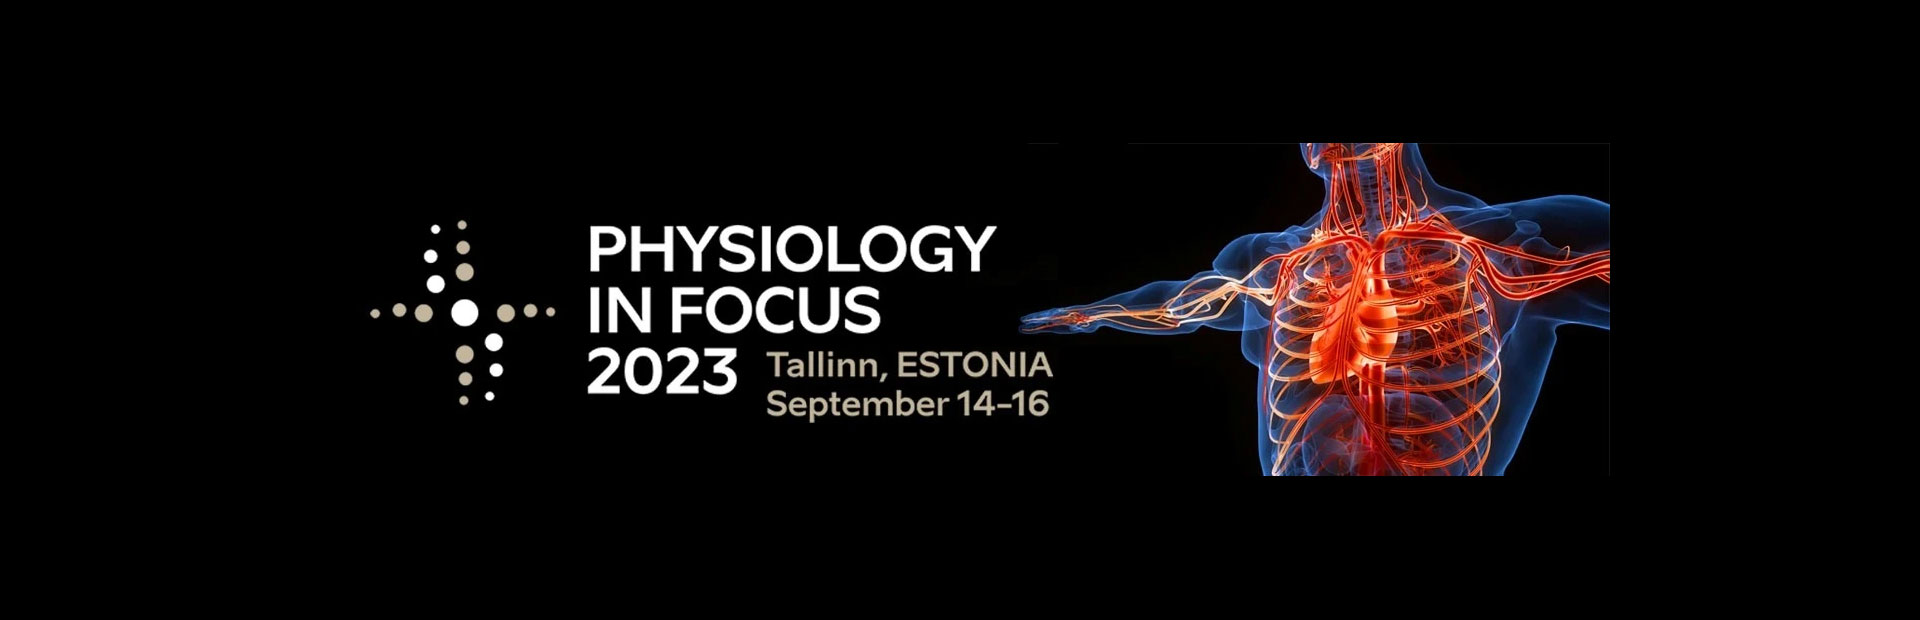 Physiology in Focus 2023